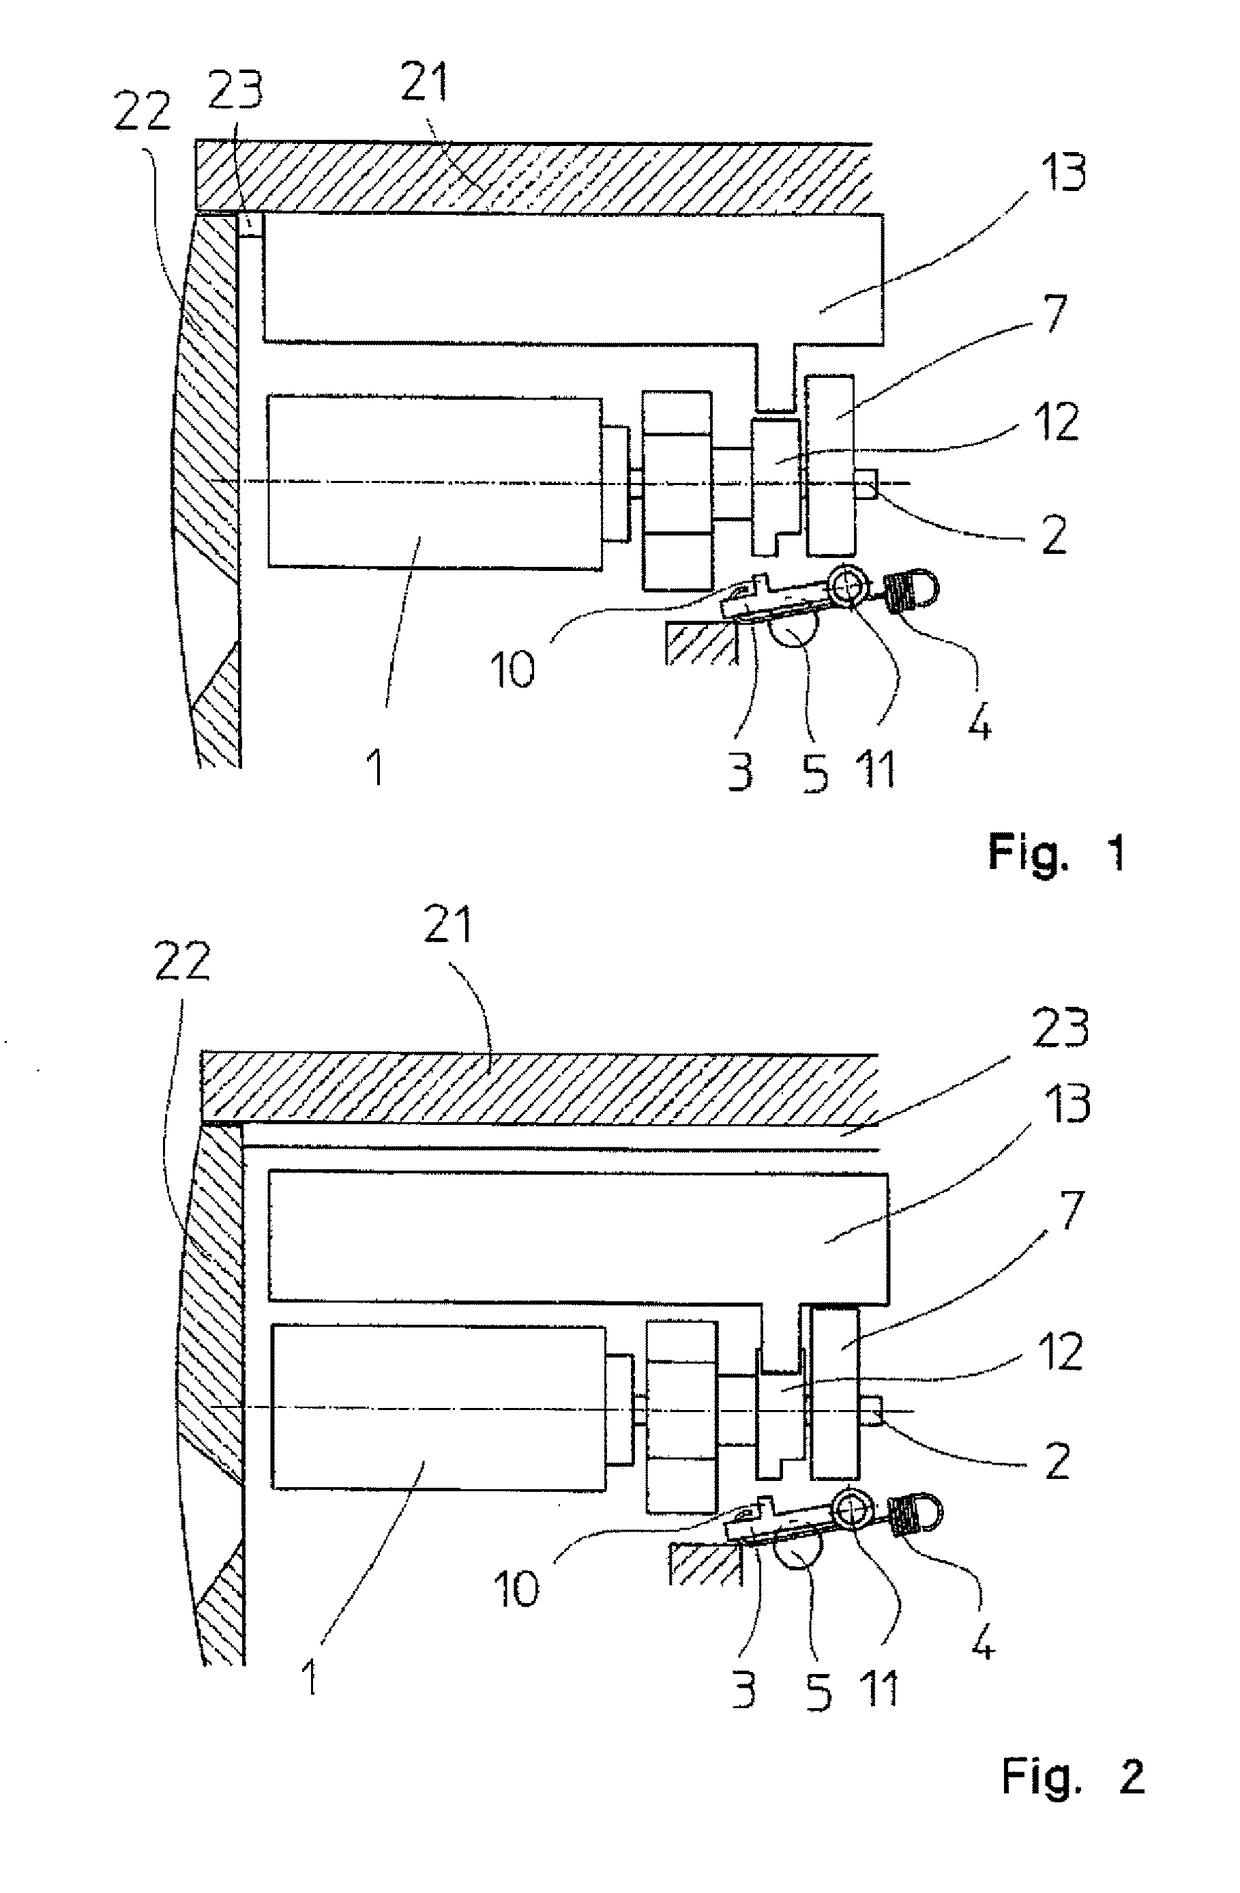 Movement lock for a locking element or an actuator in a locking system